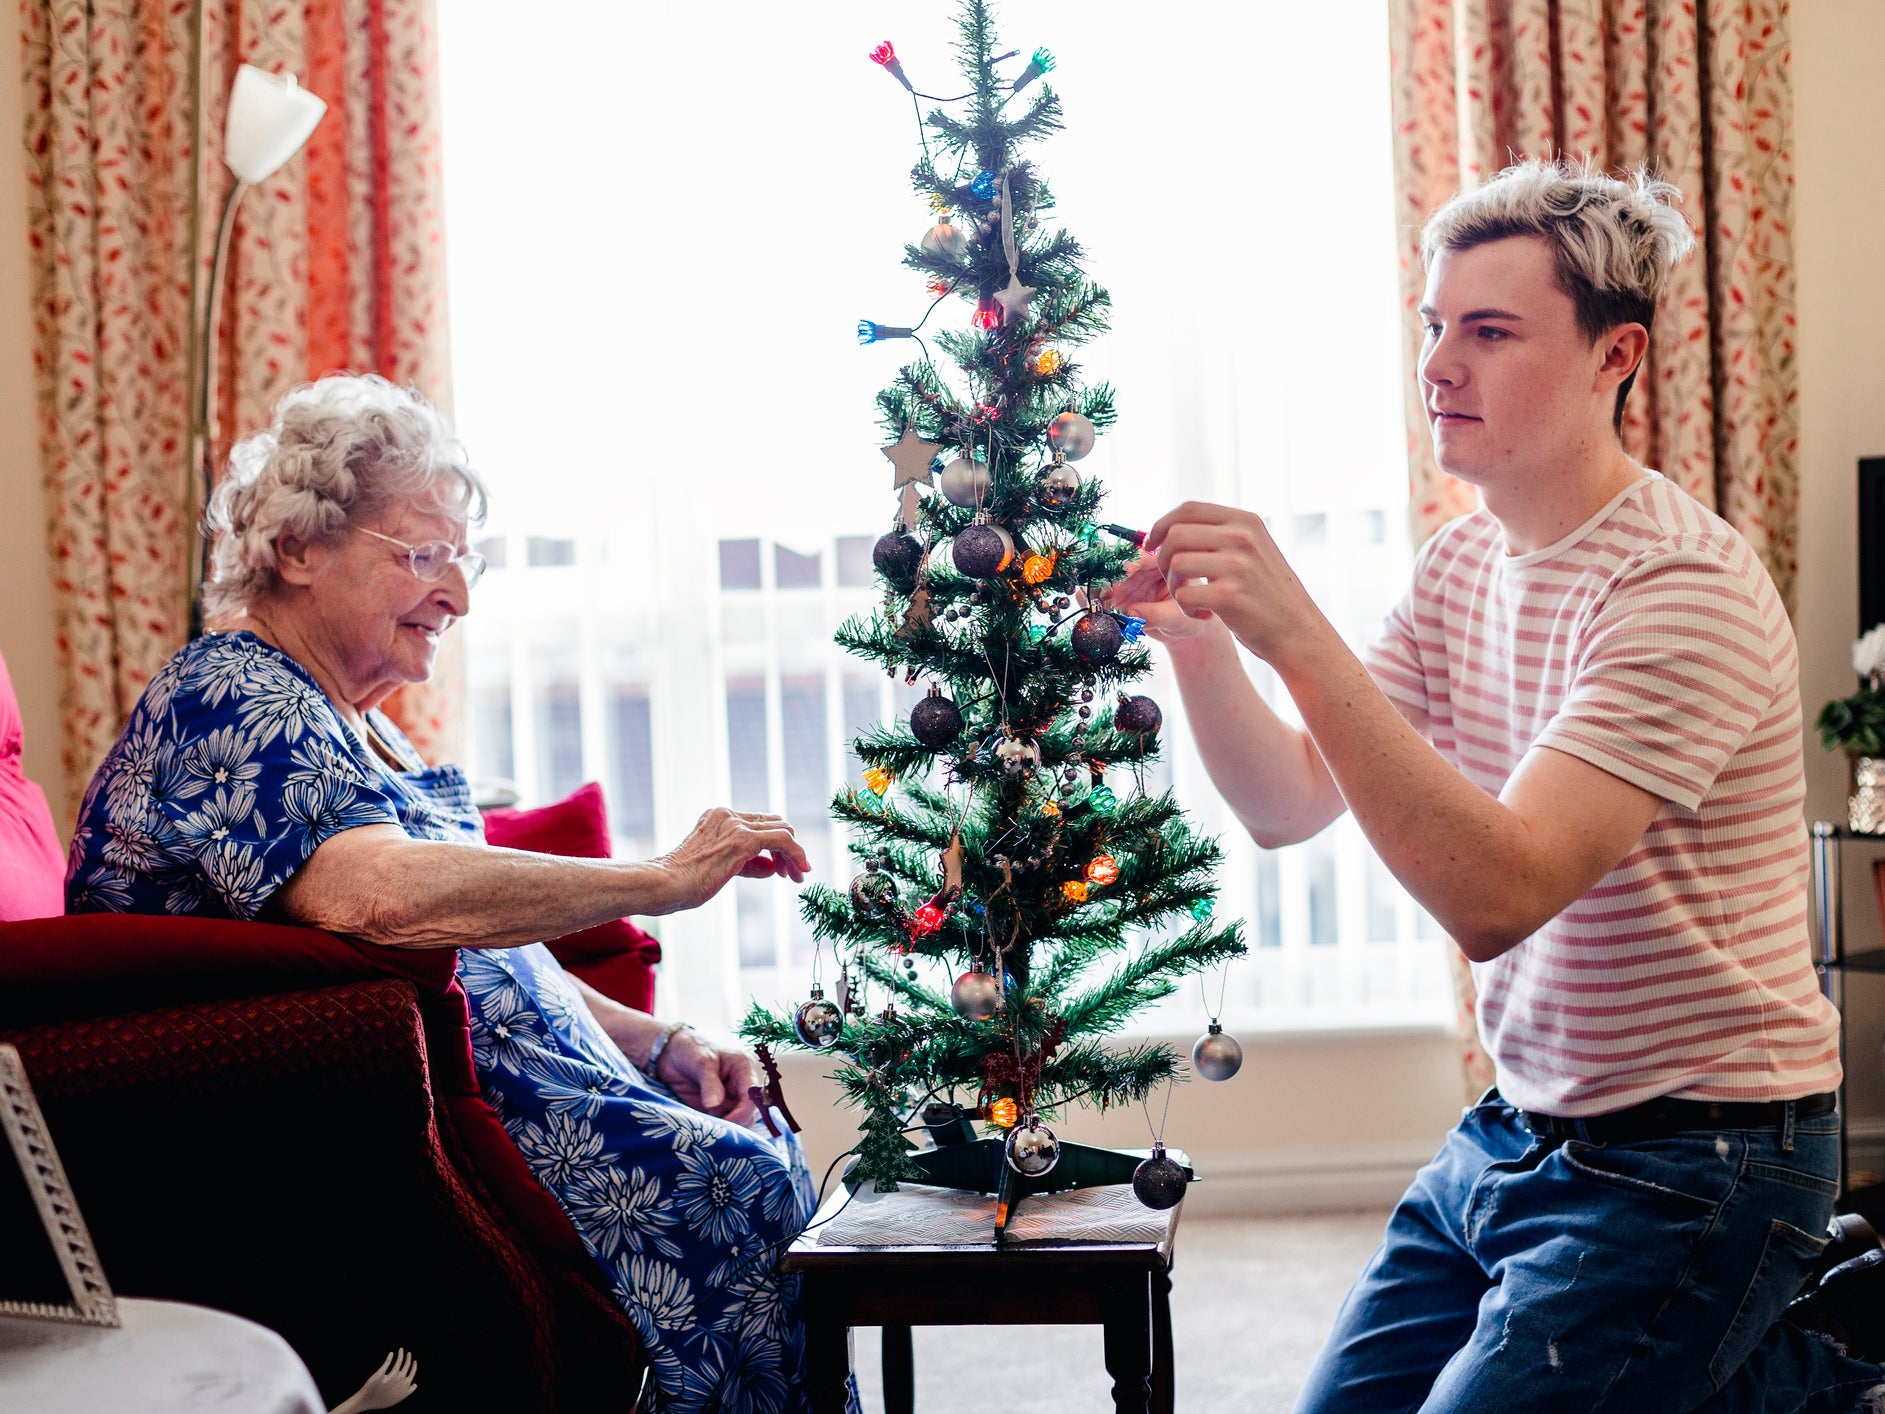 There are multiple ways of helping people who are experiencing loneliness throughout the year